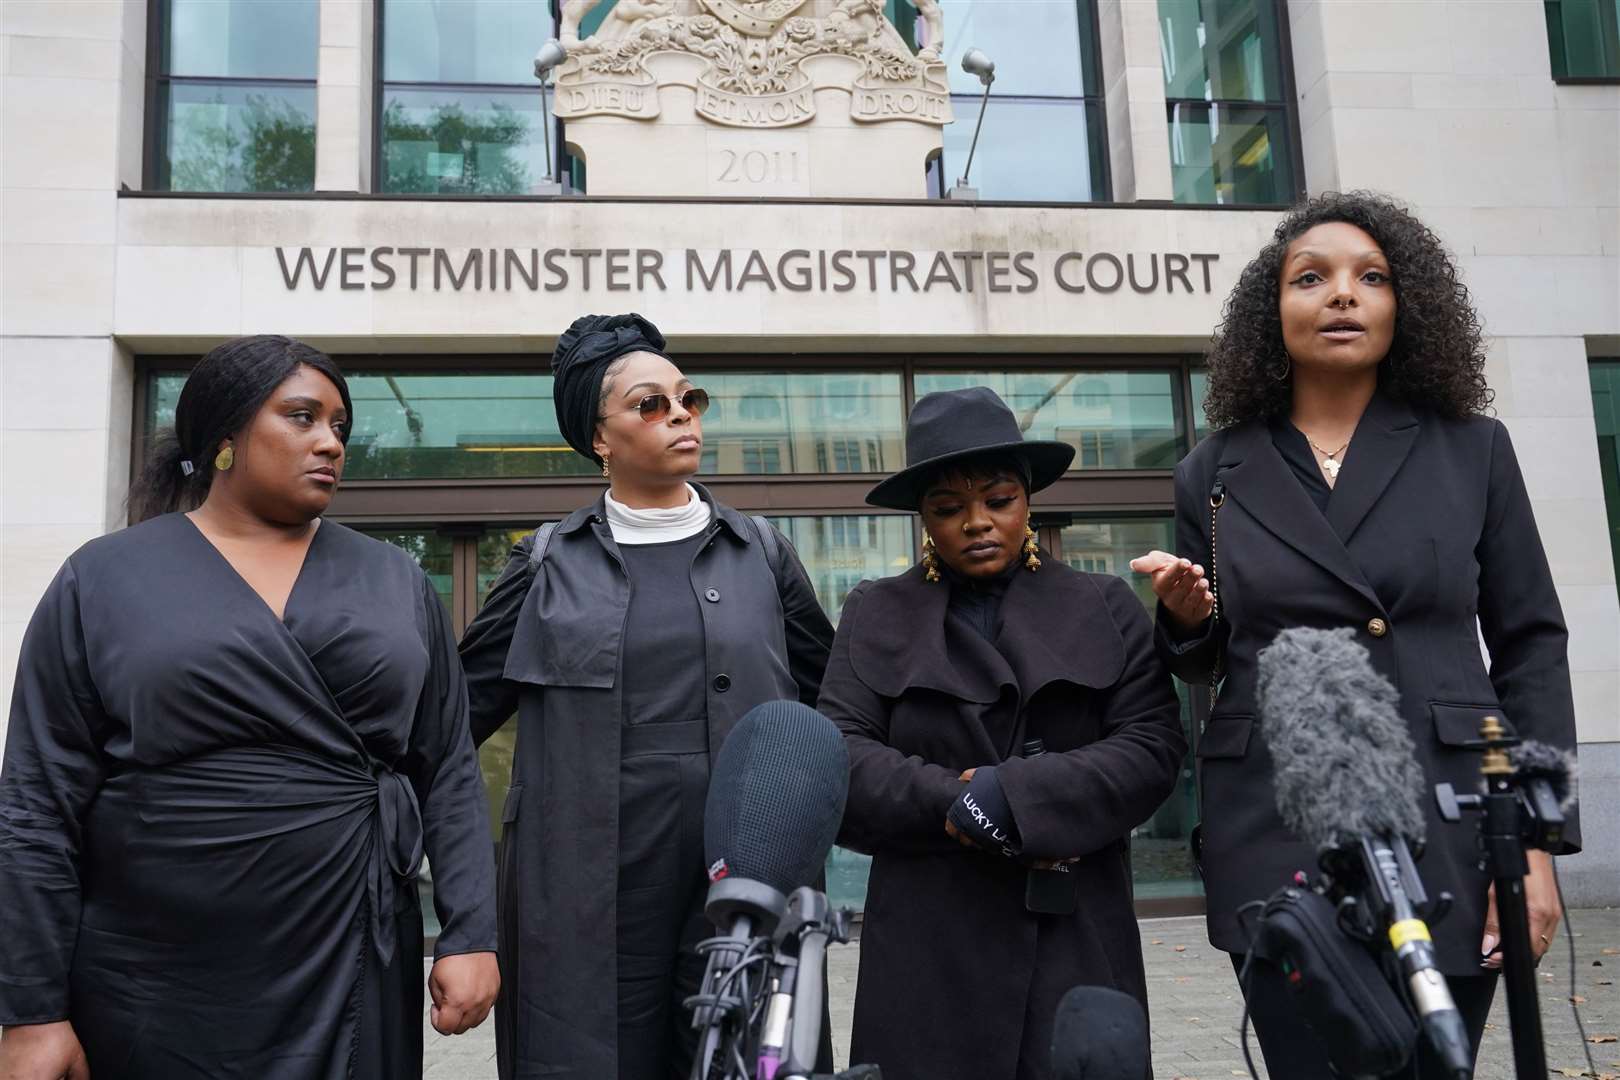 Members of campaign group Justice For Chris Kaba outside Westminster Magistrates Court on Thursday. (Lucy North/PA)